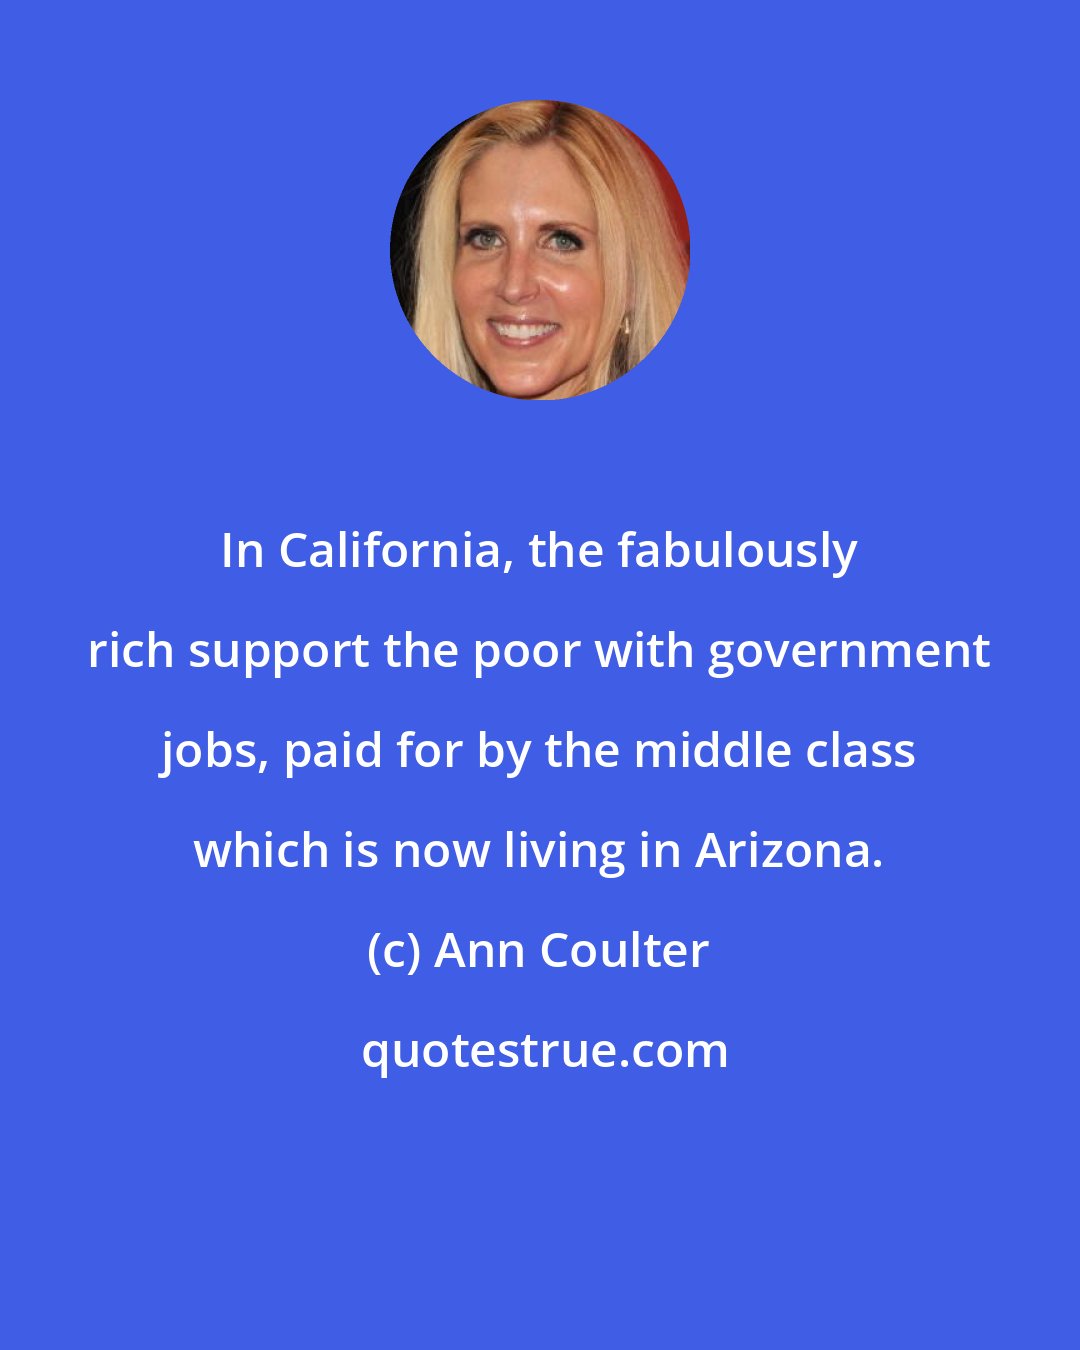 Ann Coulter: In California, the fabulously rich support the poor with government jobs, paid for by the middle class which is now living in Arizona.